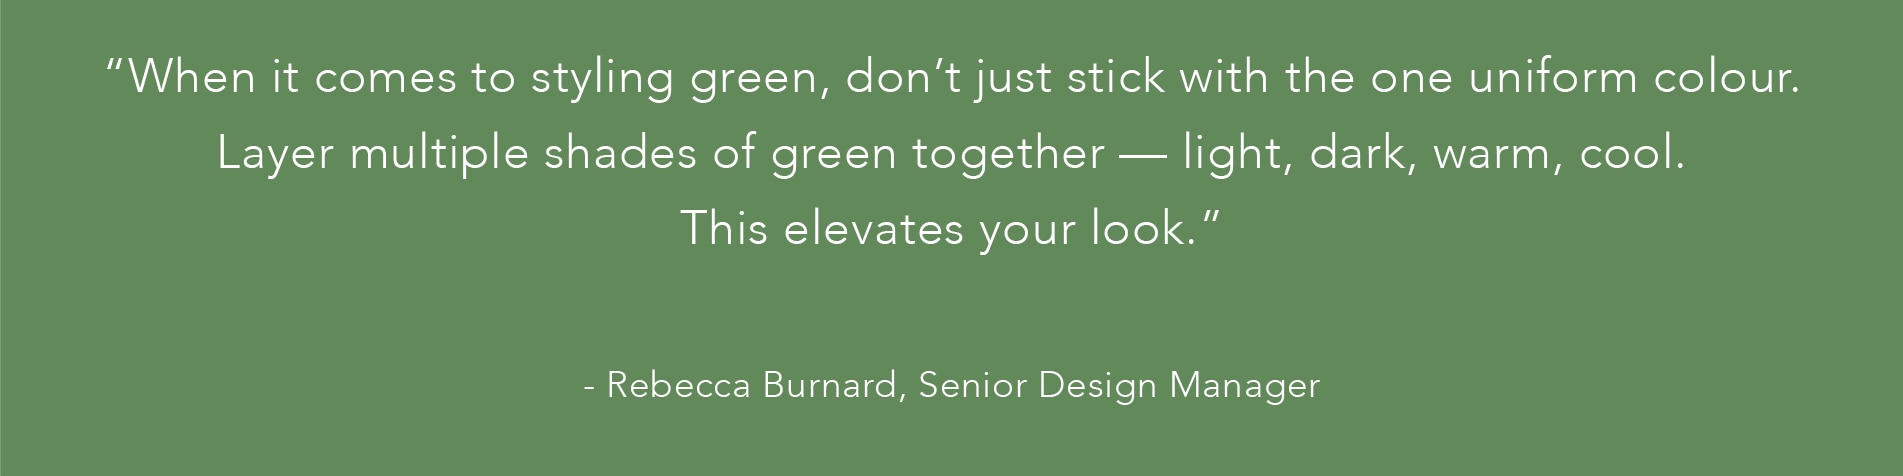 white quote against green background saying “When it comes to styling green, don’t just stick with the one uniform colour. Layer multiple shades of green — light, dark, warm, cool. This elevates your look."